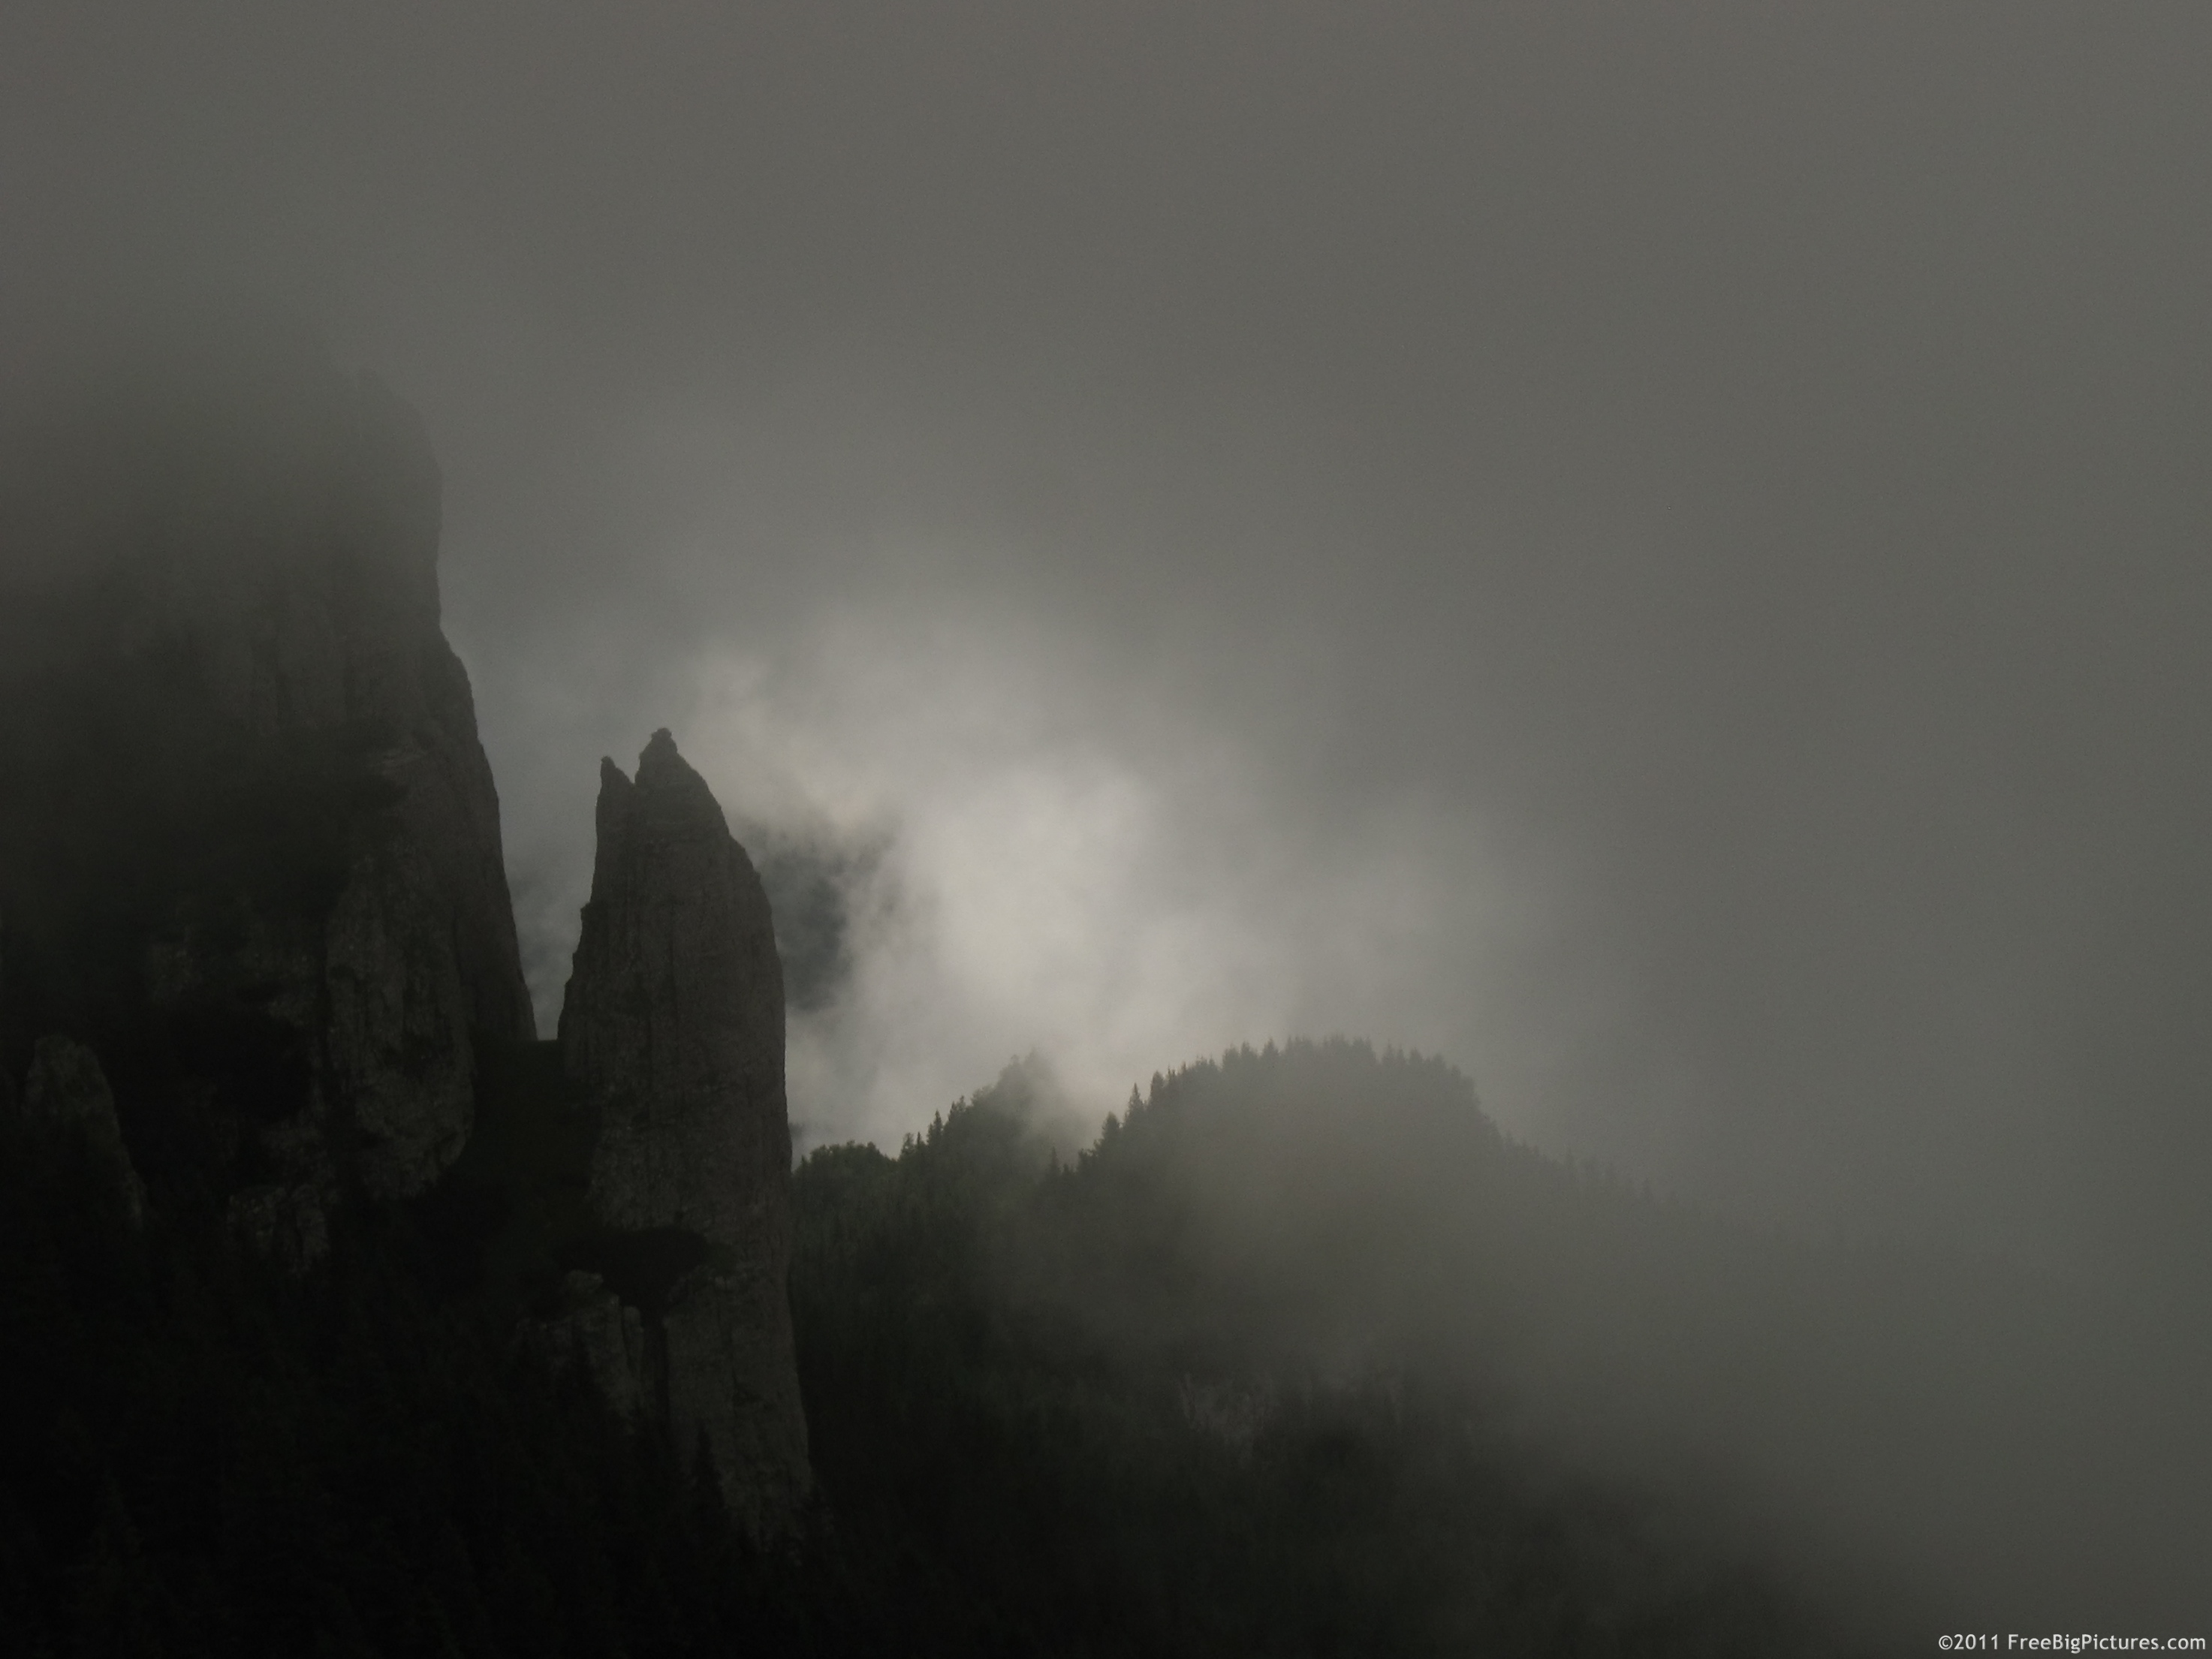 A gray day between clouds, on Ceahlau Massif, a legendary place from Romania